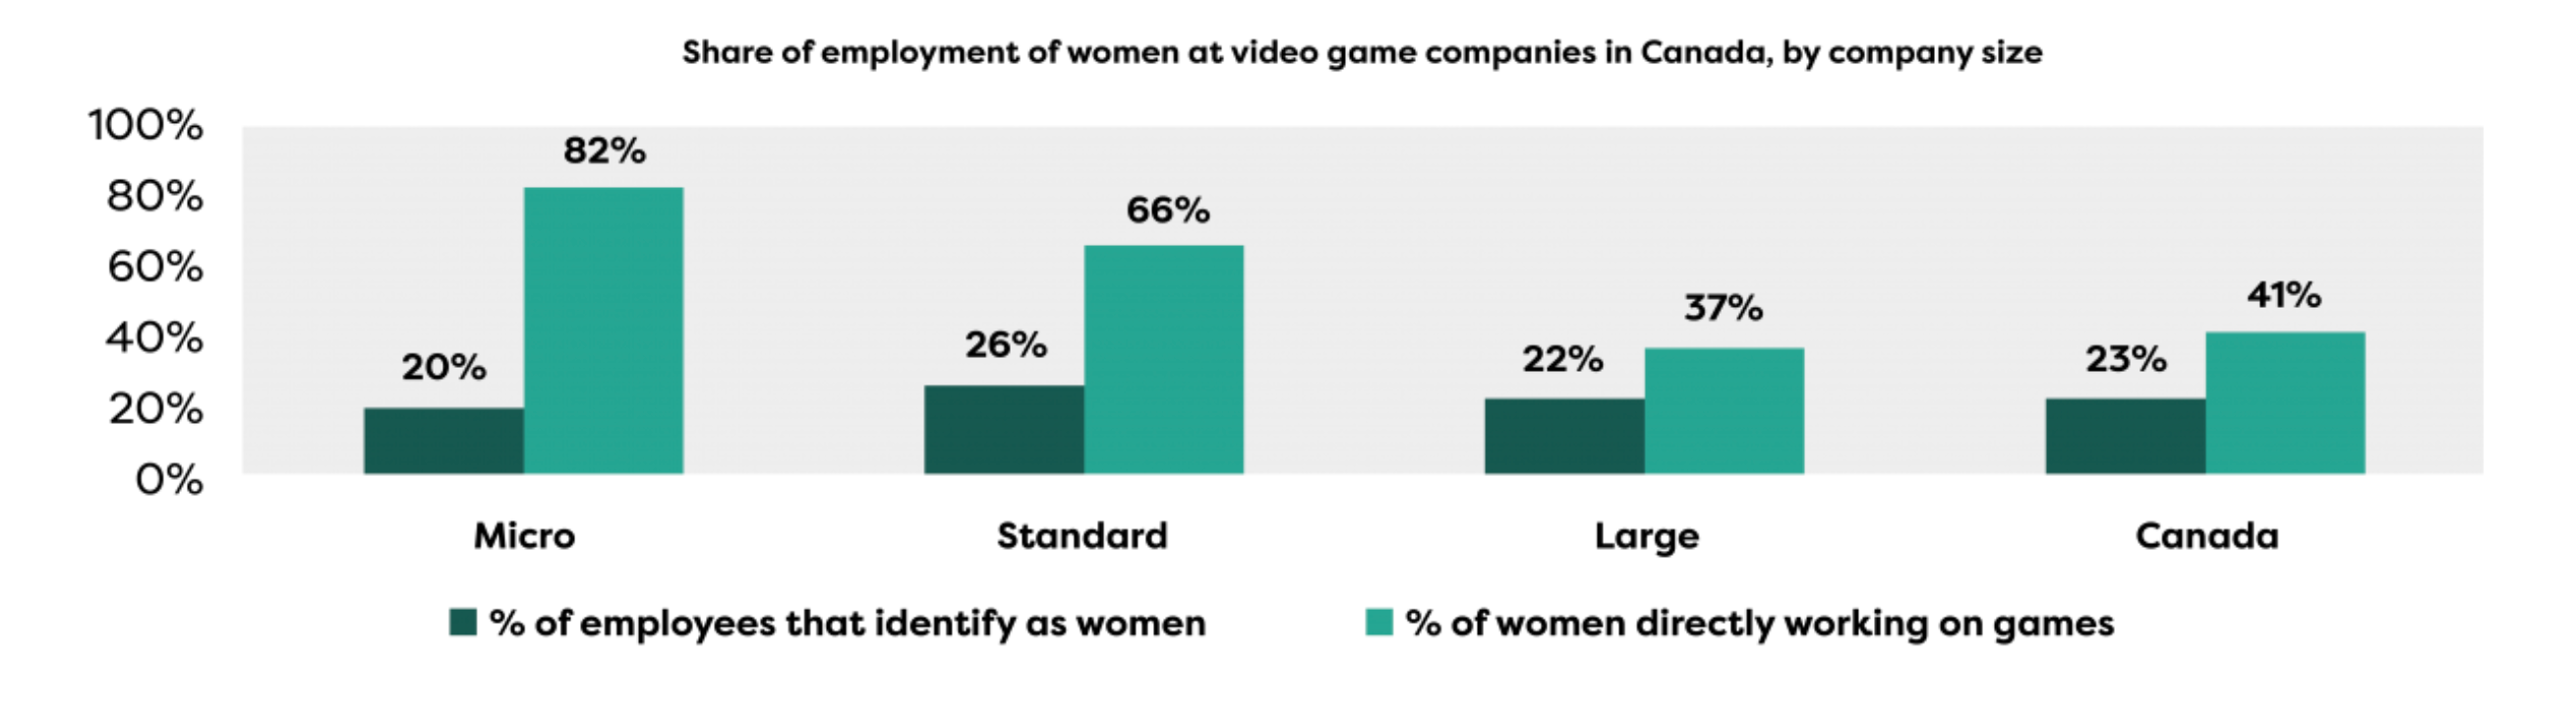 Canadian gaming industry women employment